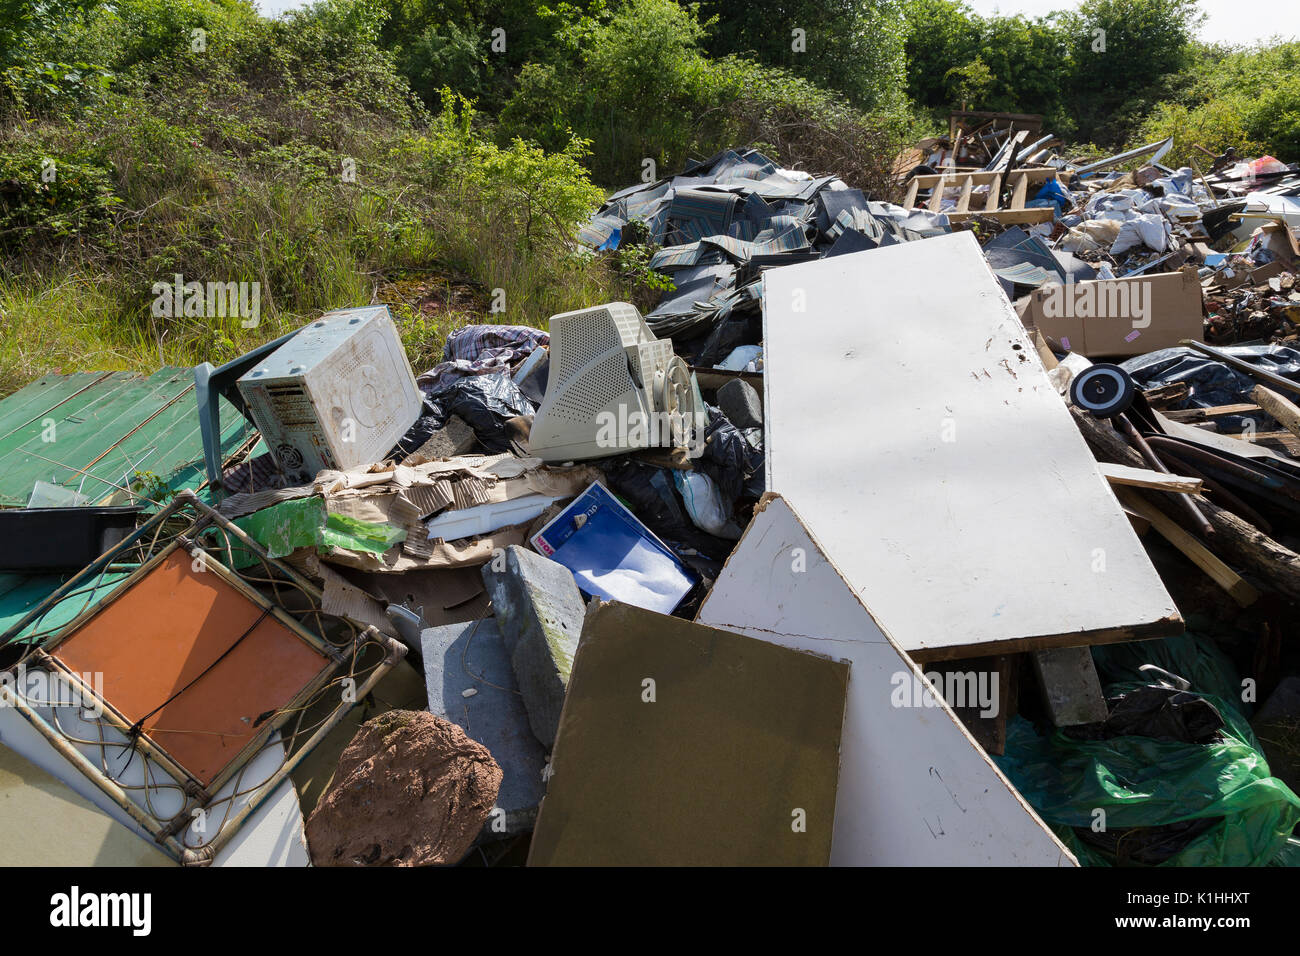 Illegally Dumped Domestic and Industrial Waste on Private Land in Essex Stock Photo